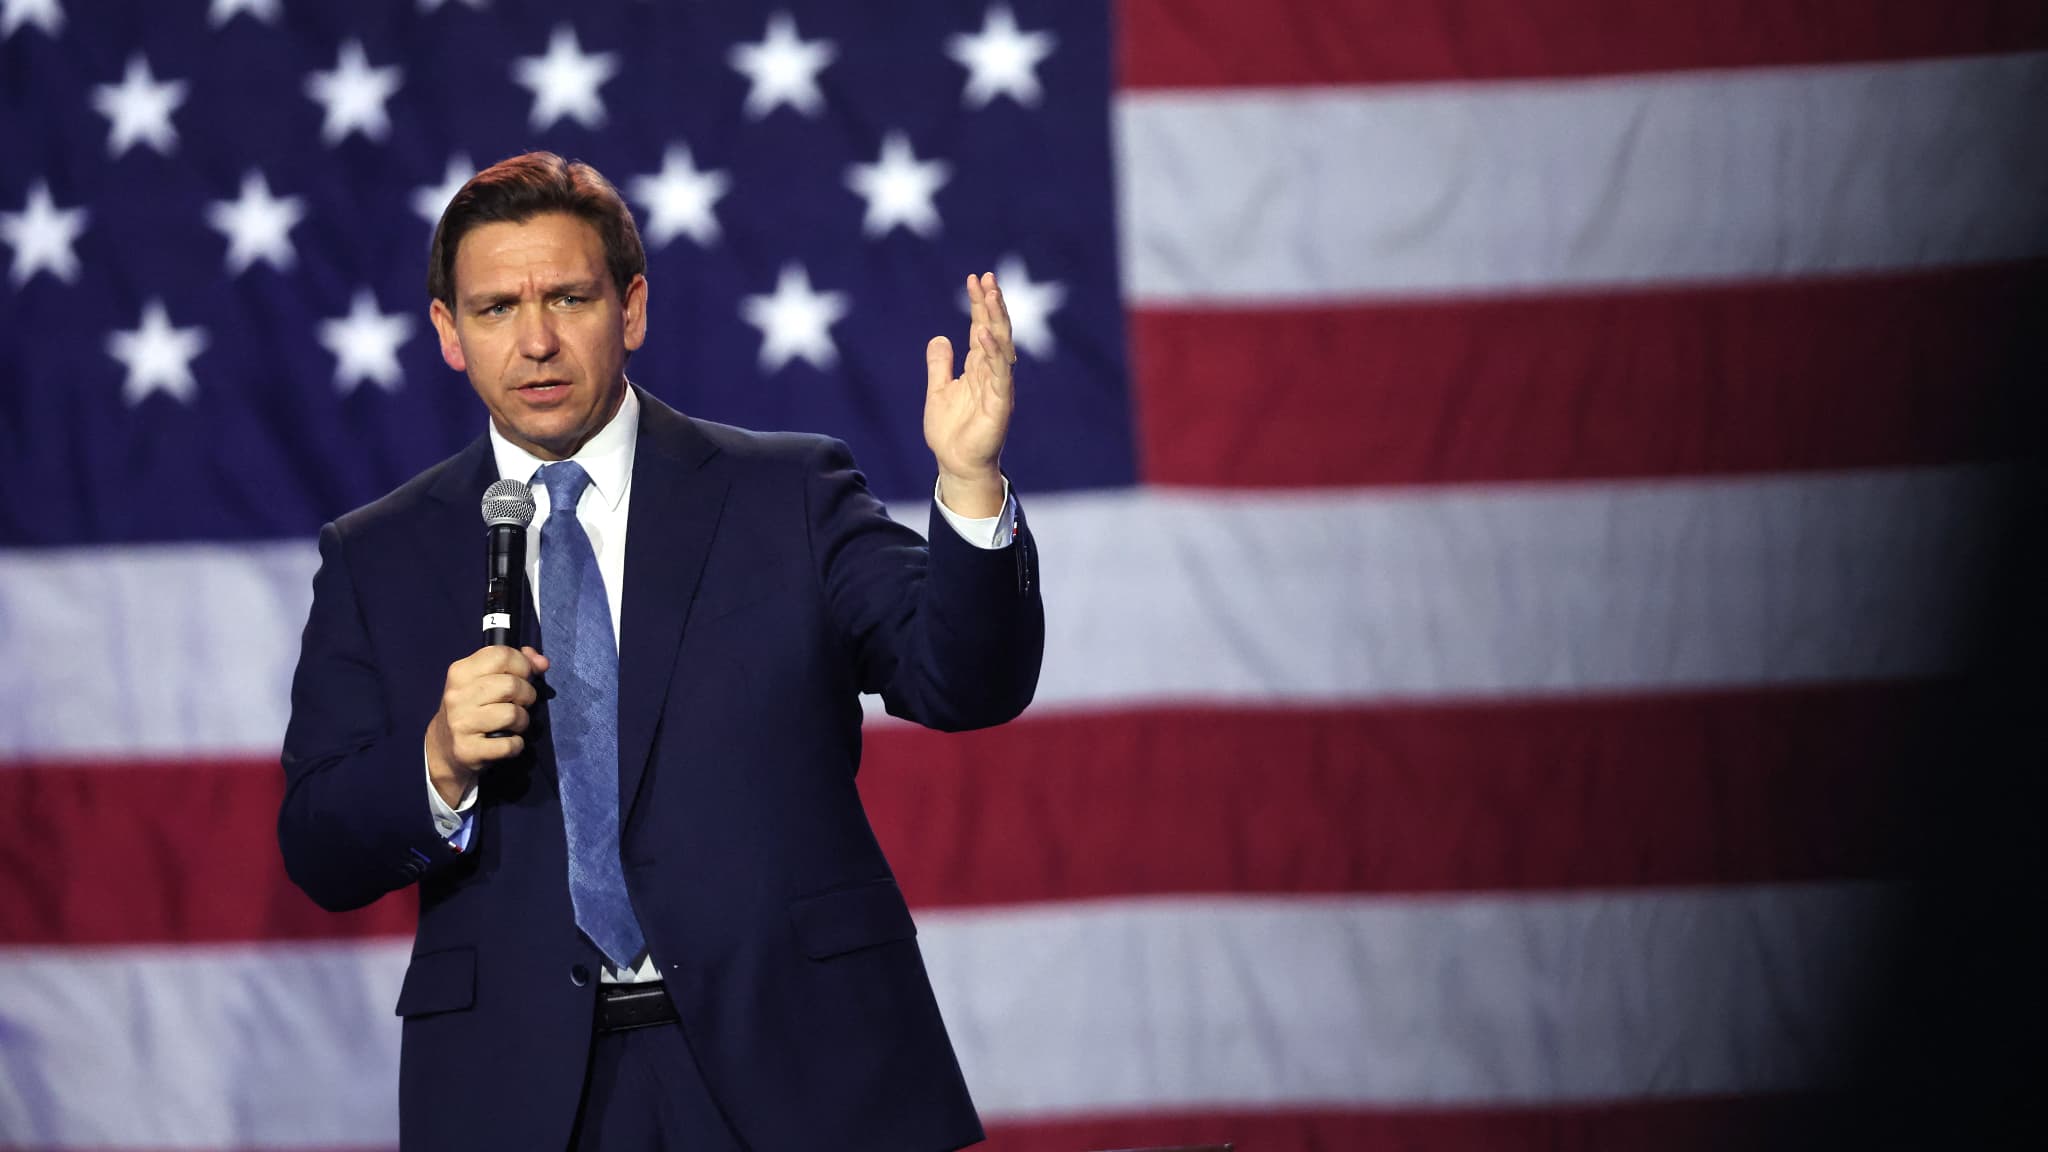 Ron DeSantis, Republican challenger to Donald Trump, is firing his campaign manager